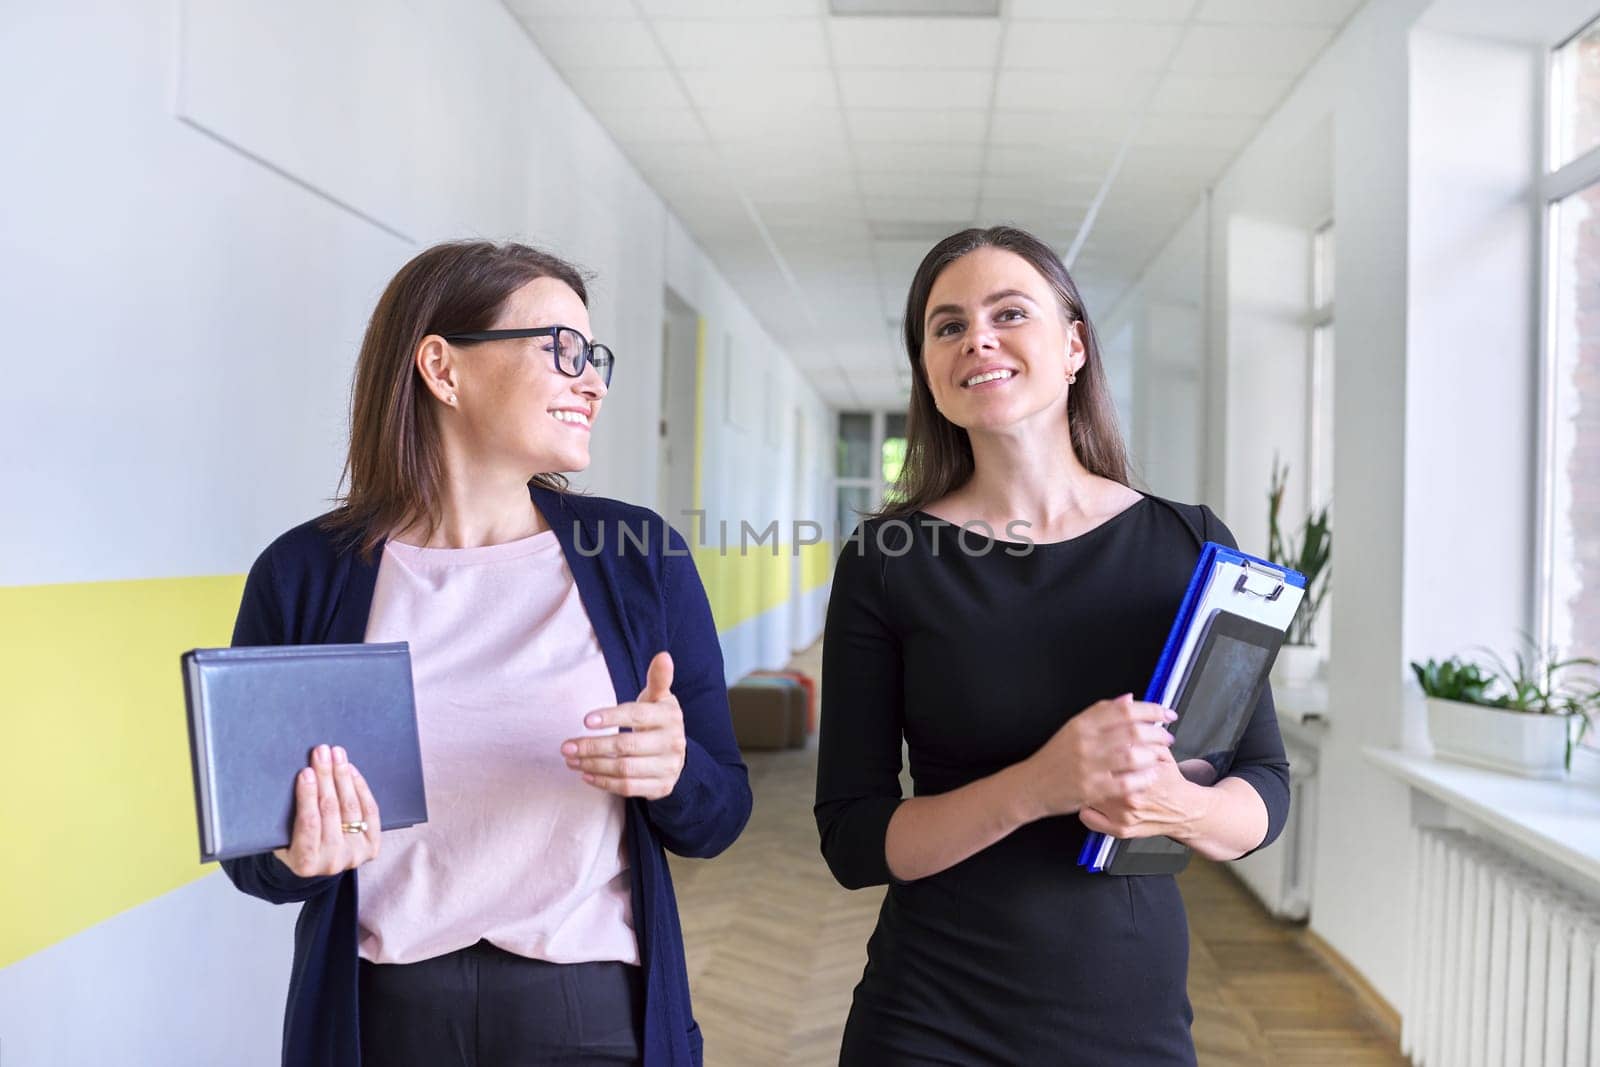 Two colleagues of businesswoman, teacher walking and talking on corridor of office, school. Positive smiling young and middle aged females, business education professions office workers concept